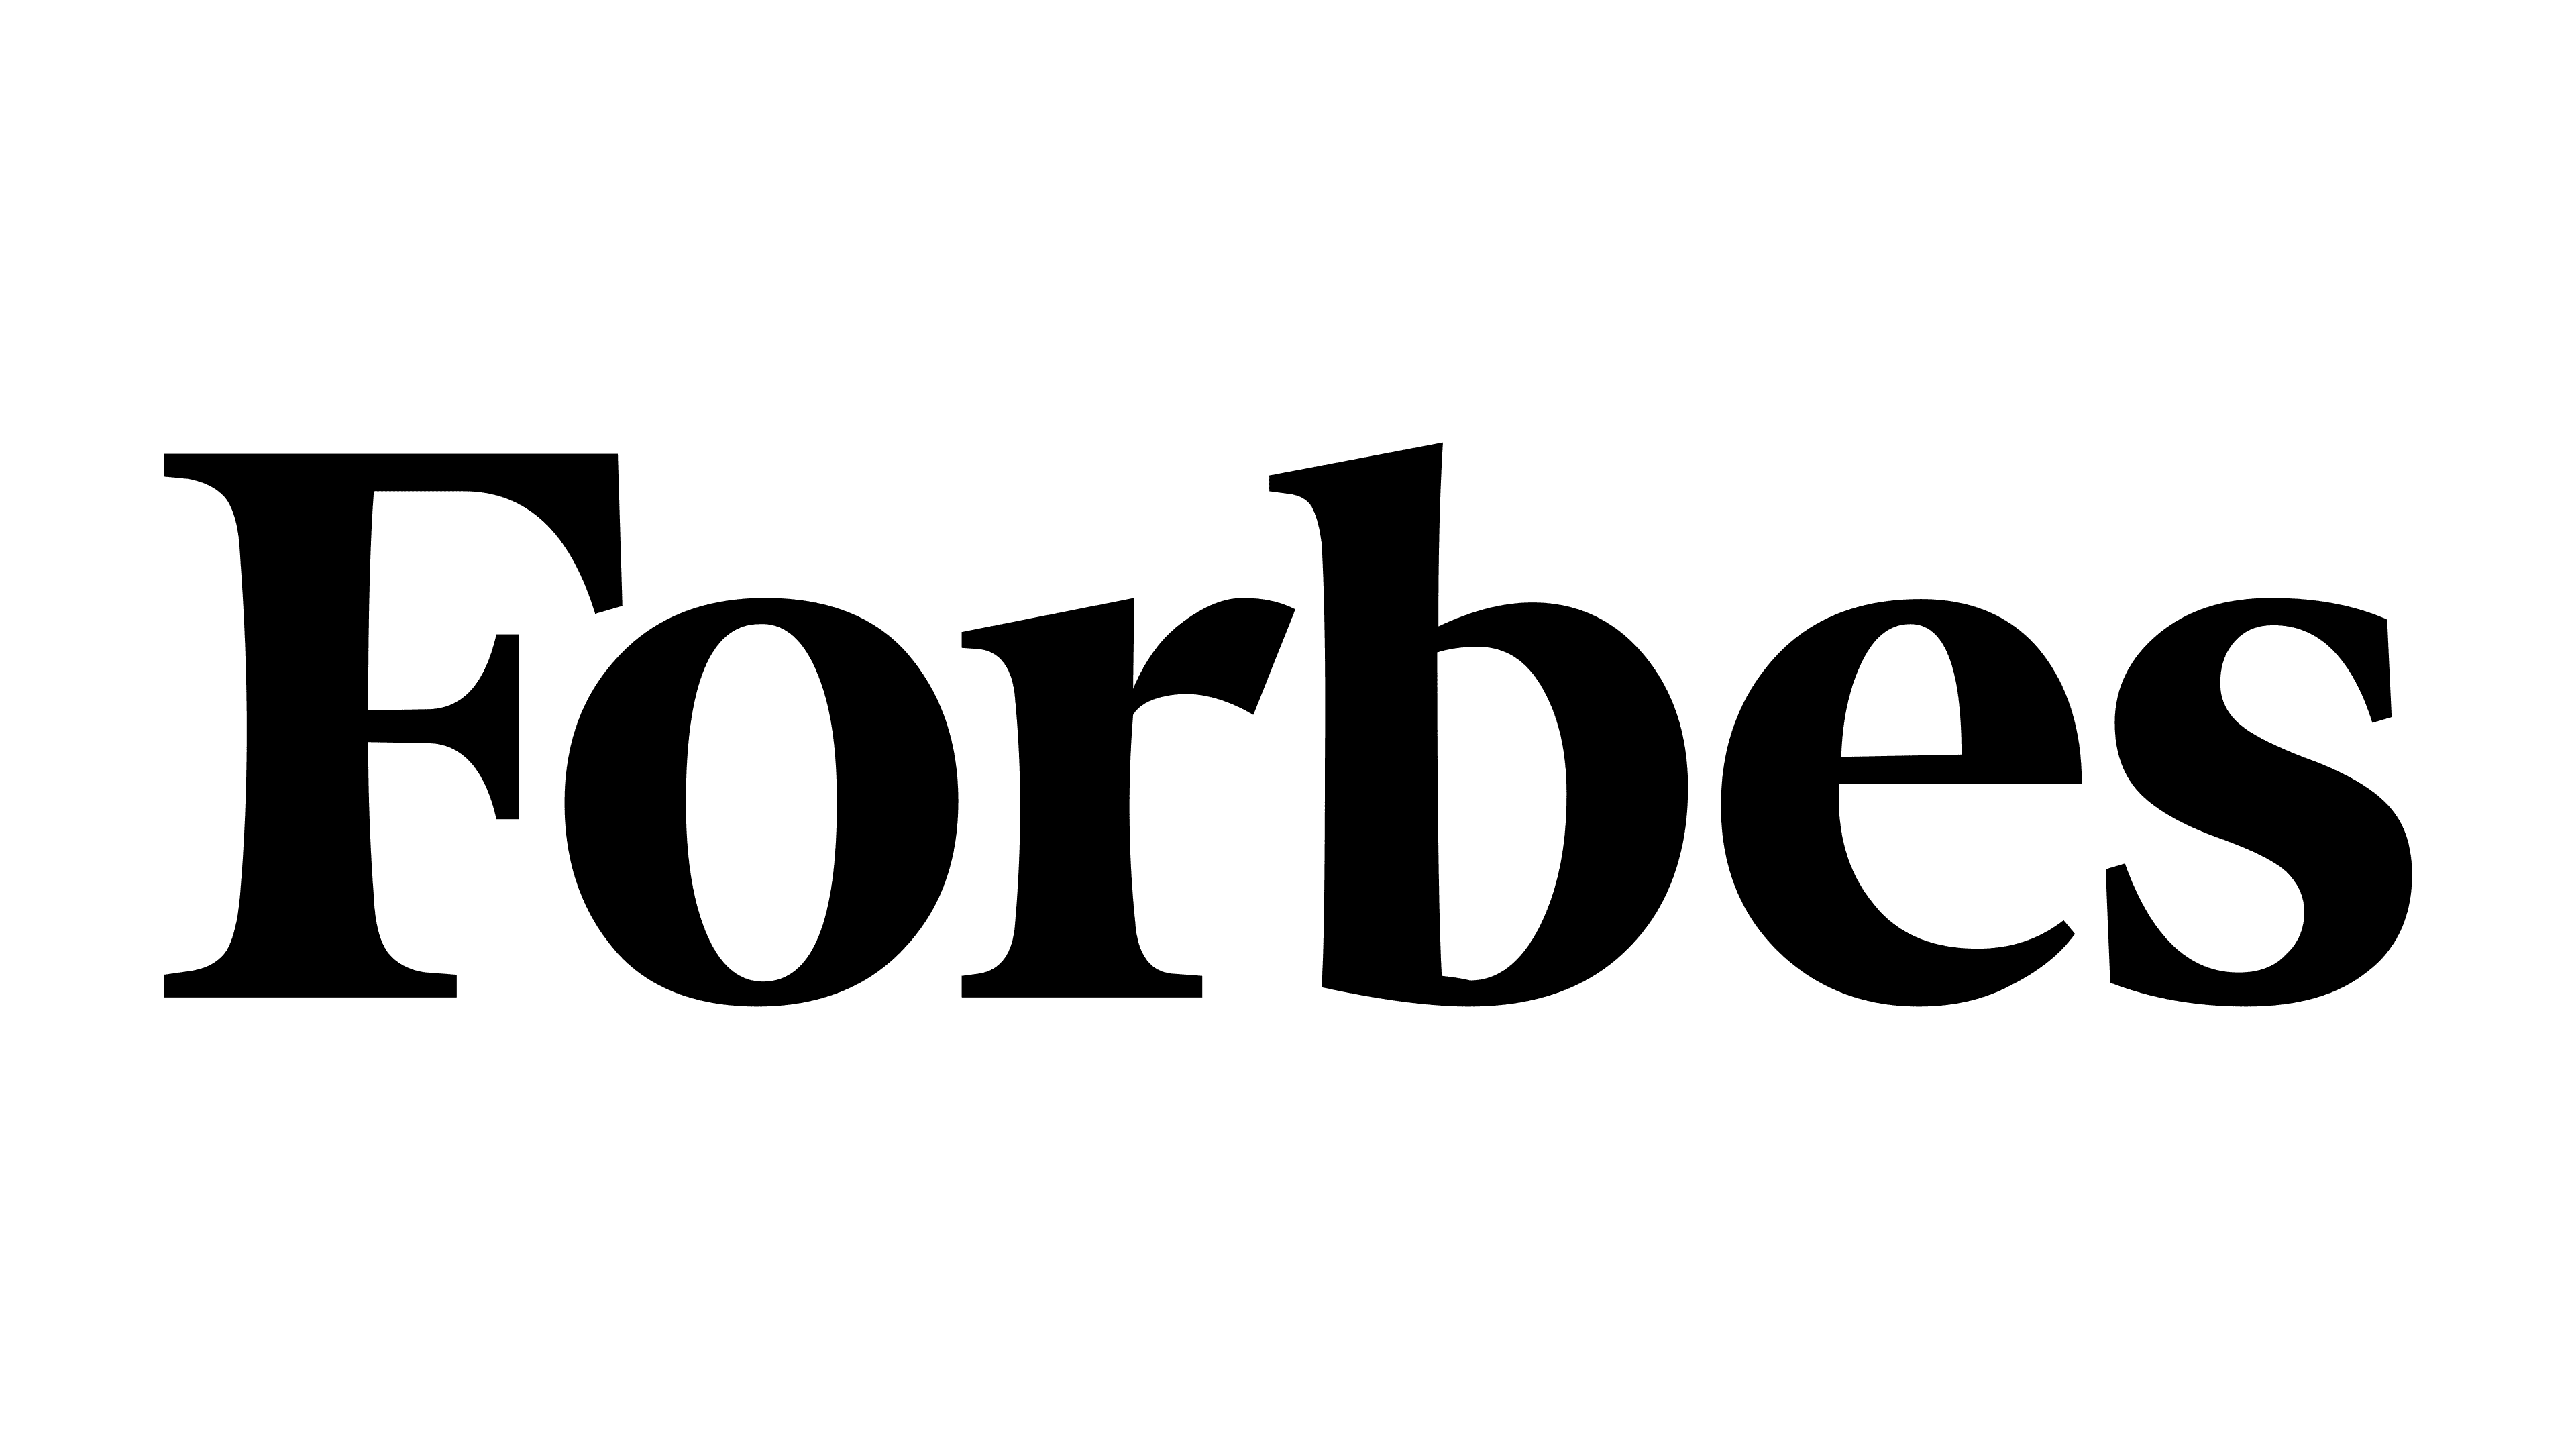 https://www.paperlessparts.com/wp-content/uploads/Forbes-logo.png